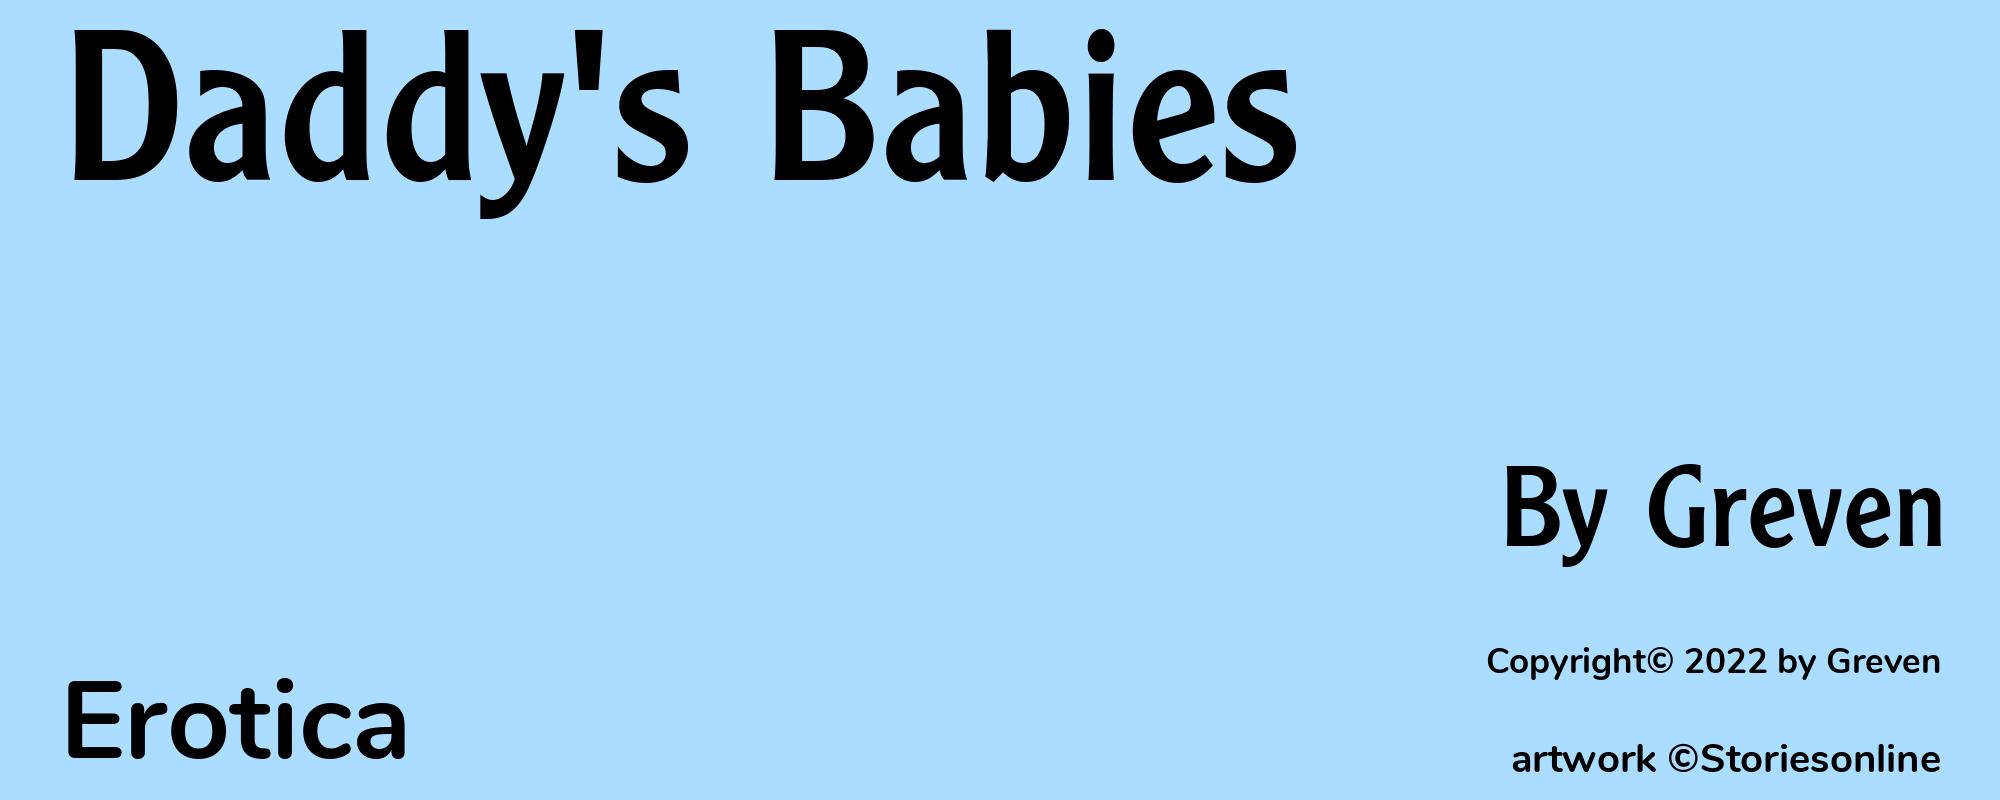 Daddy's Babies - Cover